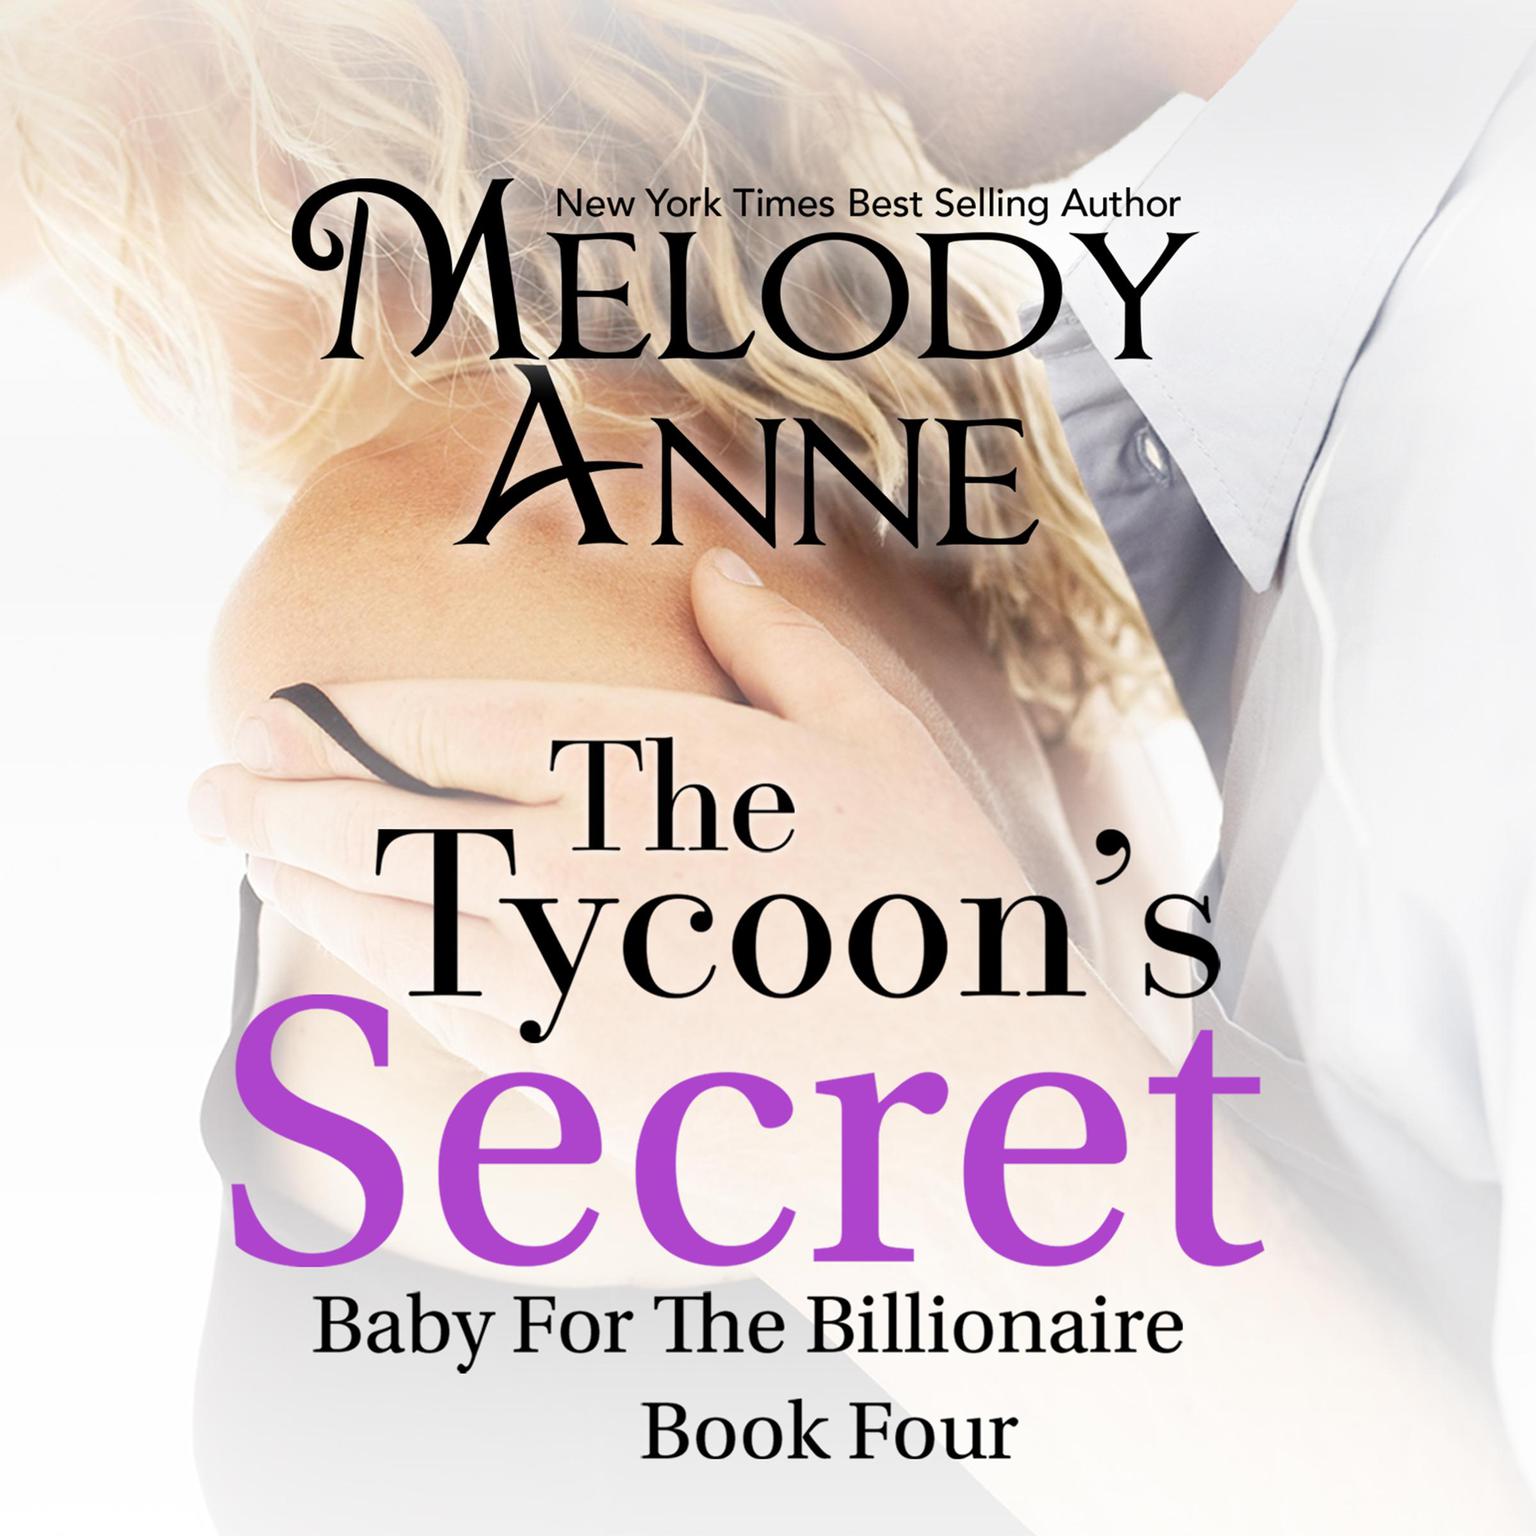 The Tycoons Secret Audiobook, by Melody Anne